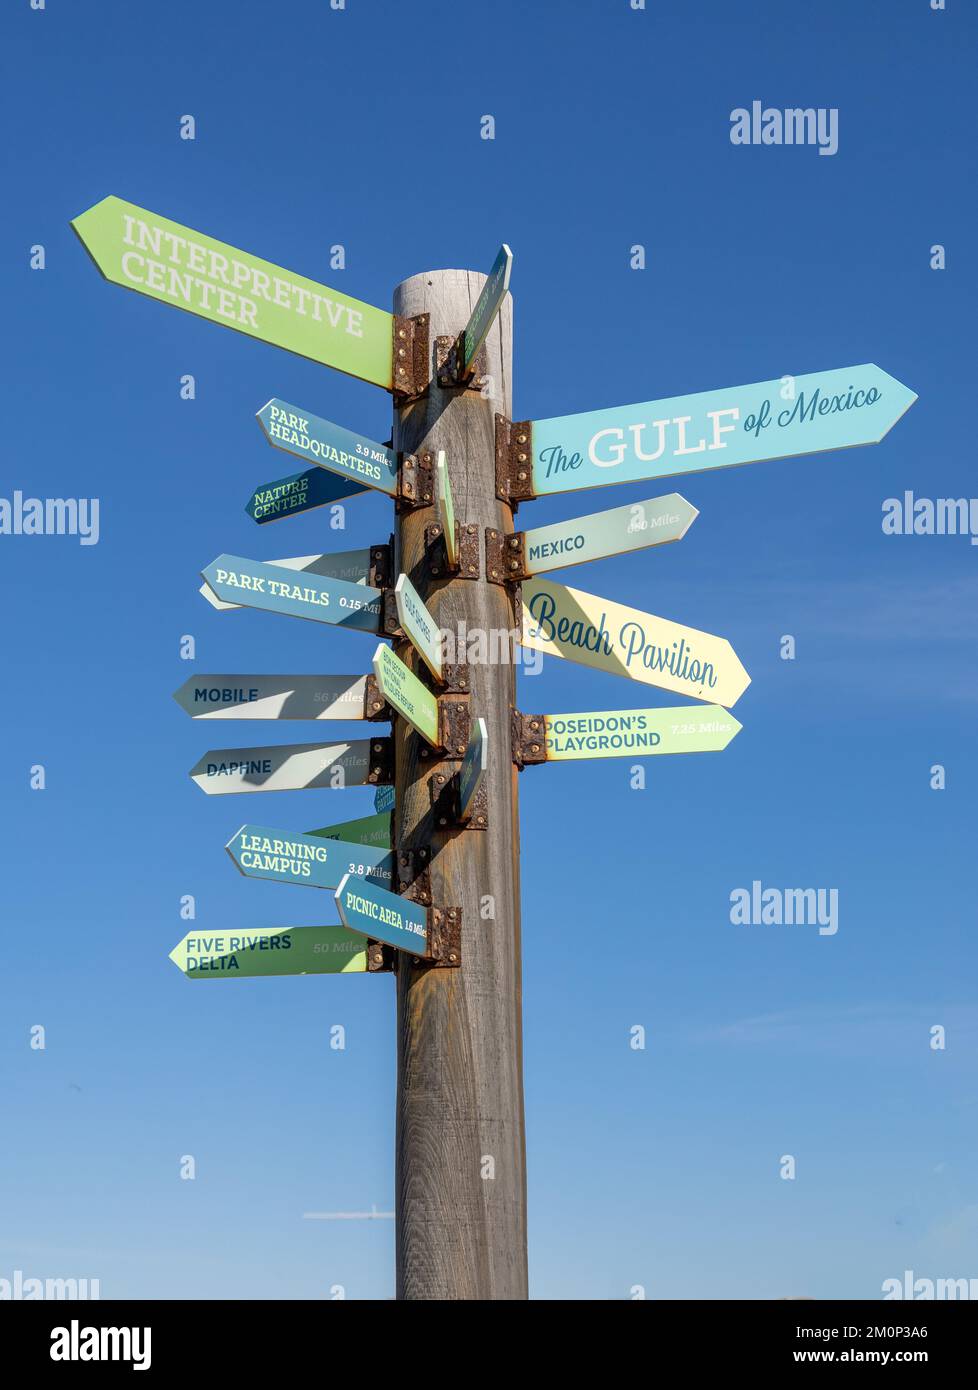 Sign Posts To Attractions In Gulf State Park Alabama United States Signposts To Areas Of The State Park On The Shores Of The Guld Of Mexico. Stock Photo